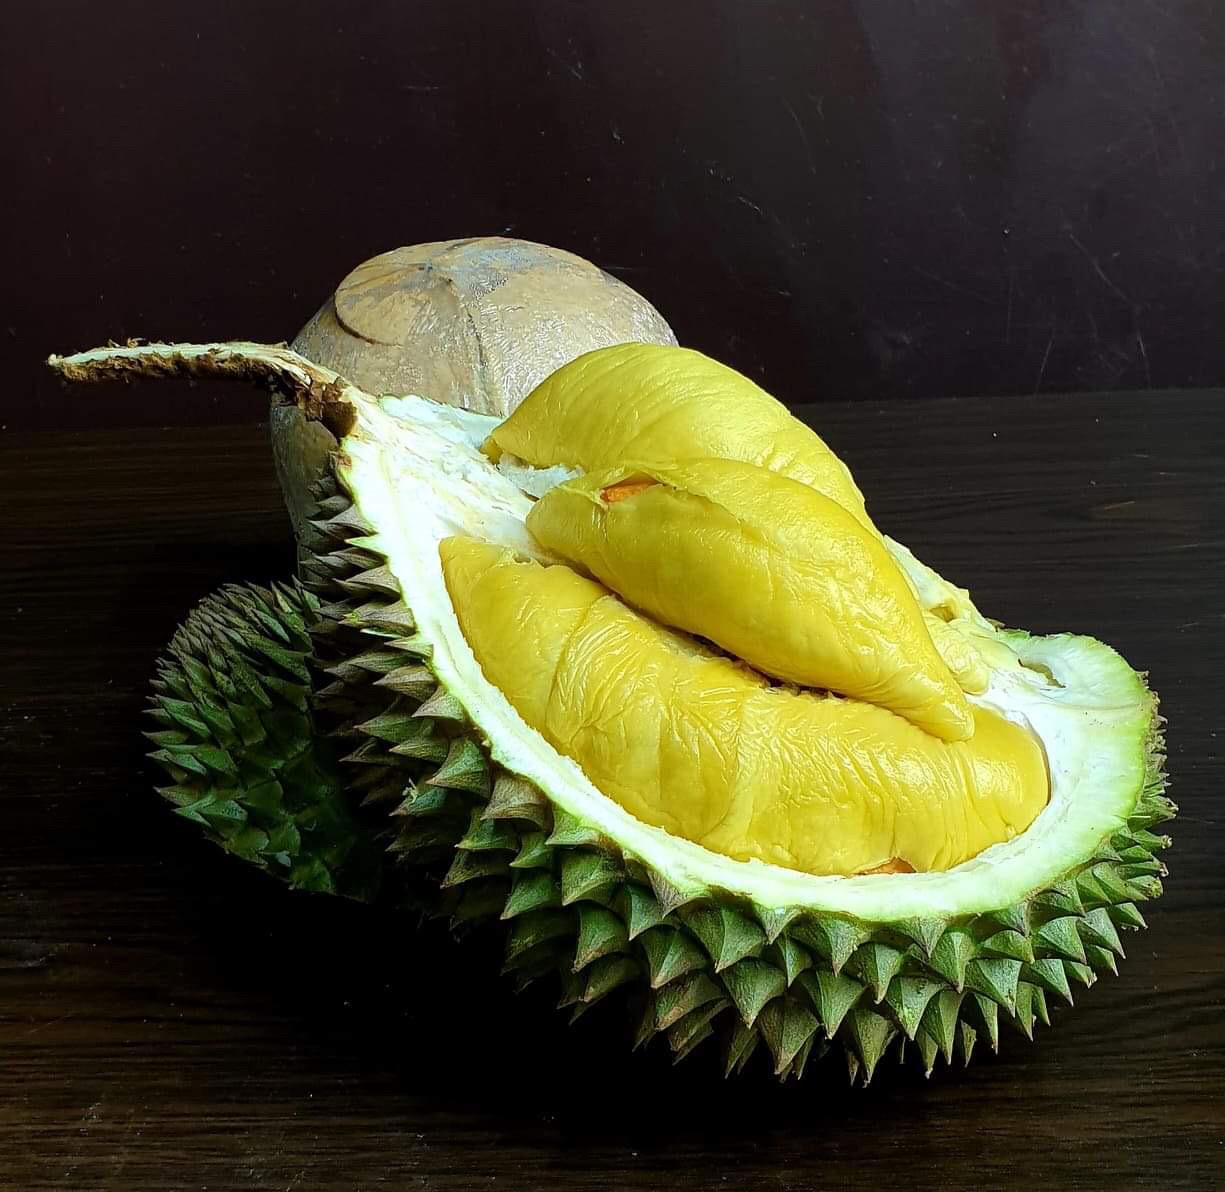 Durian Delivery Guide: Price, Service Area, and What To Expect